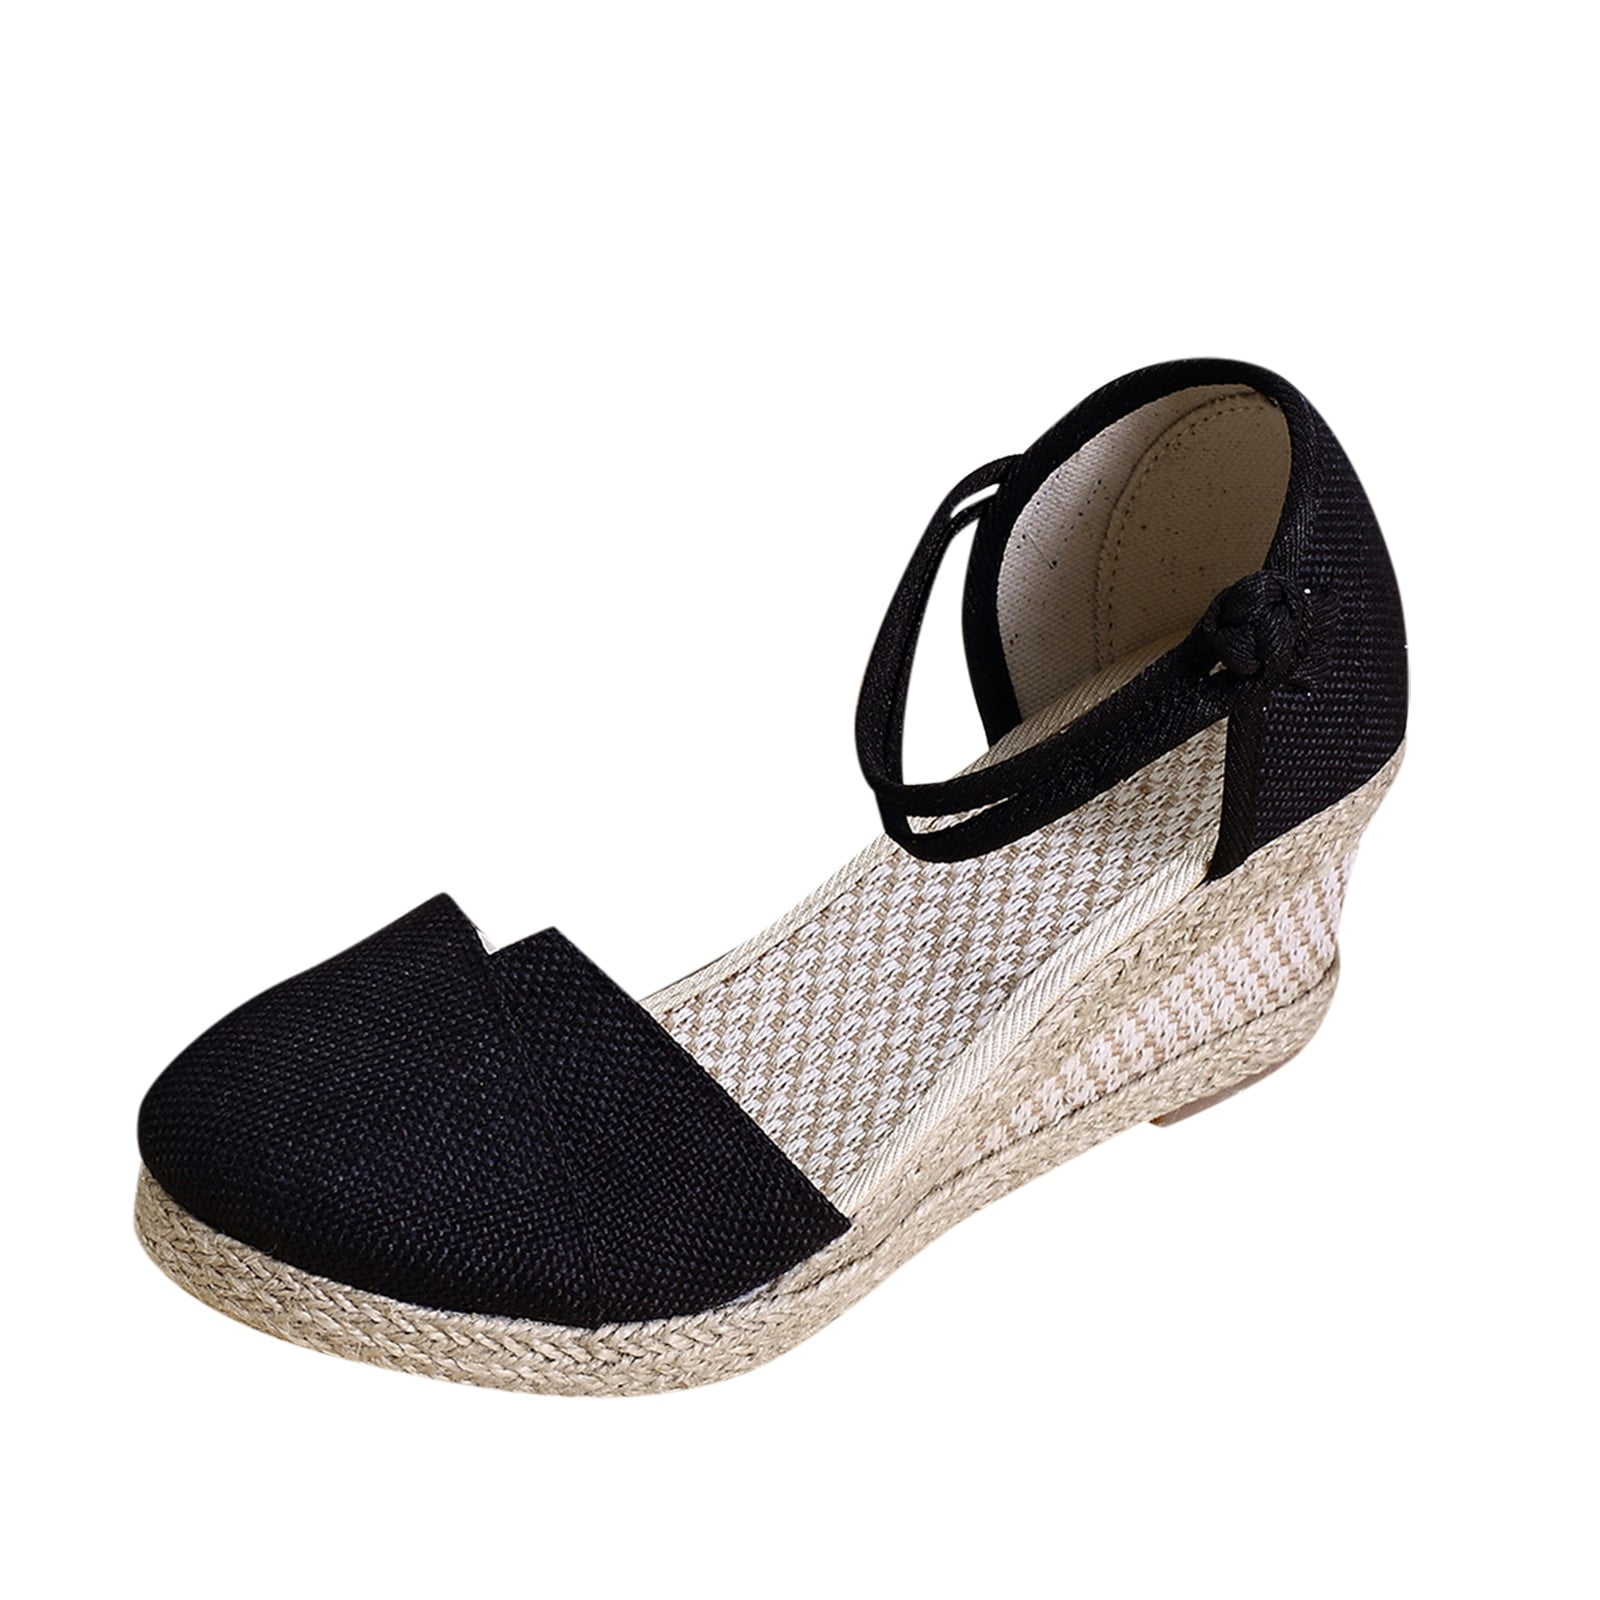 Women's Closed Toe Buckle Ankle Strap Espadrilles Leisure Wedge Sandals ...